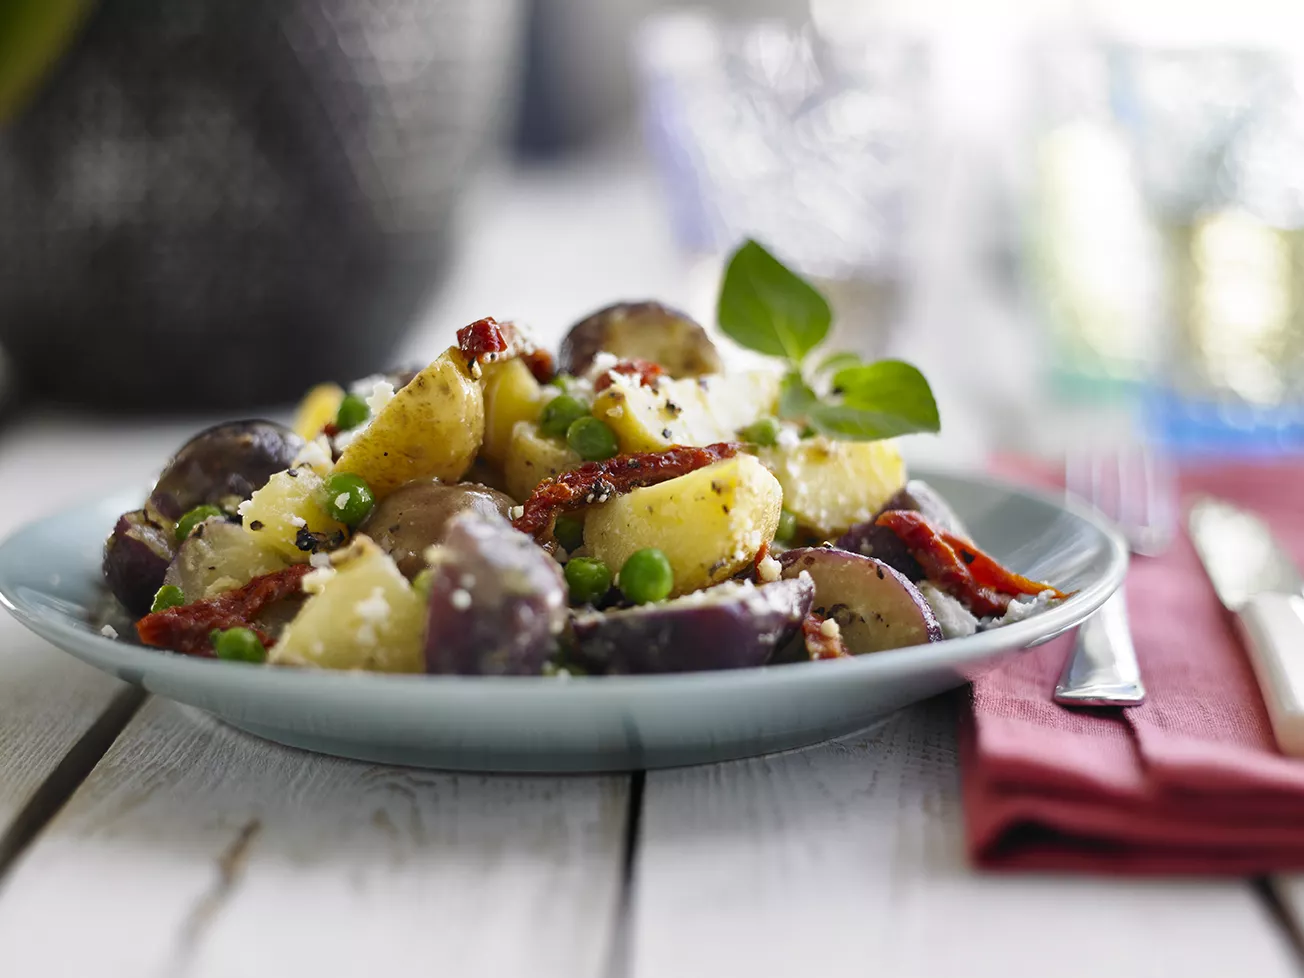 Little Potato Salad with Sun-Dried Tomatoes